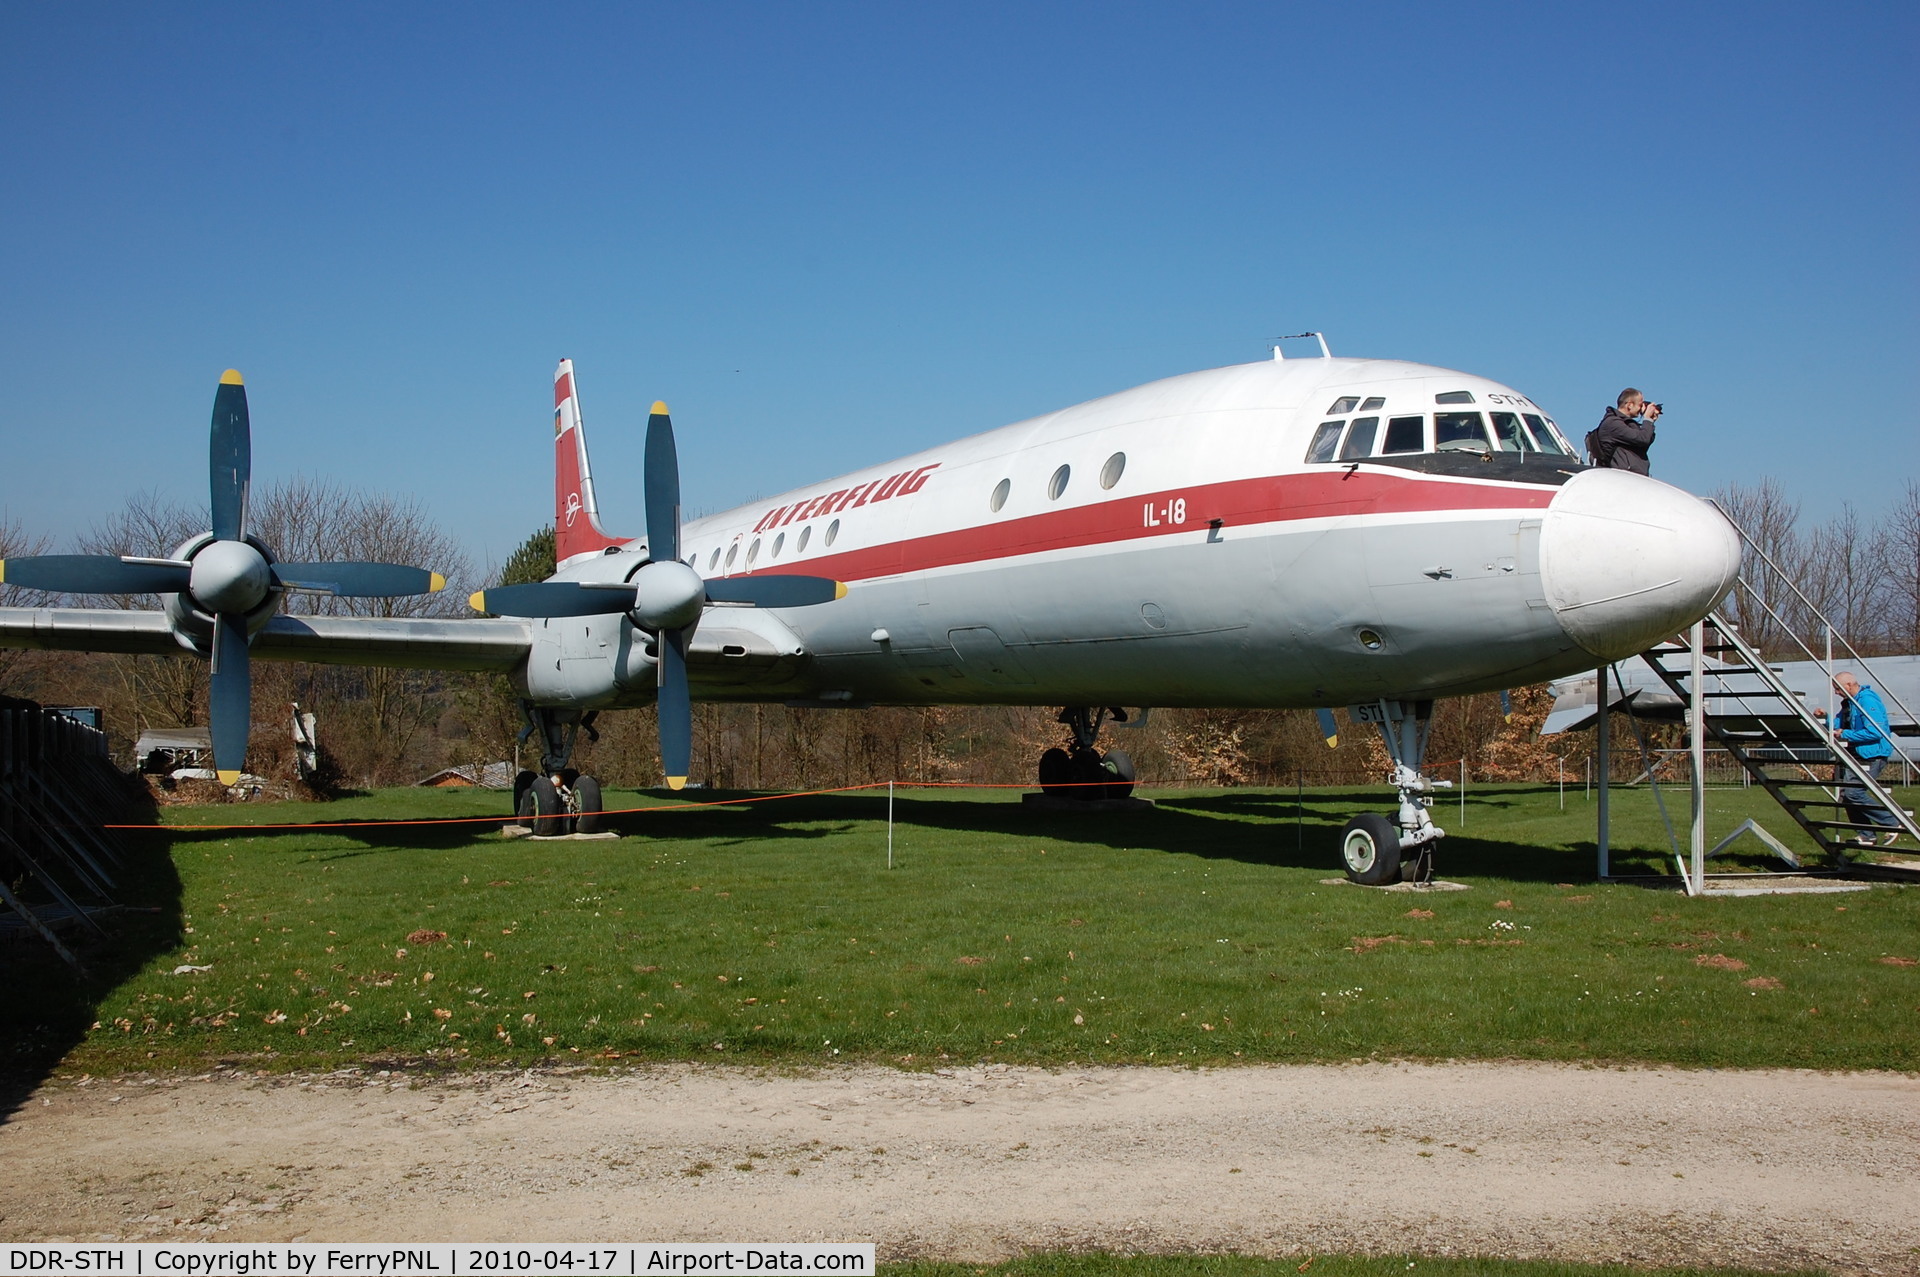 DDR-STH, Ilyushin Il-18V C/N 184007305, A long time ago I saw this aircraft operational. Now it is in Hermeskeil, Germany.